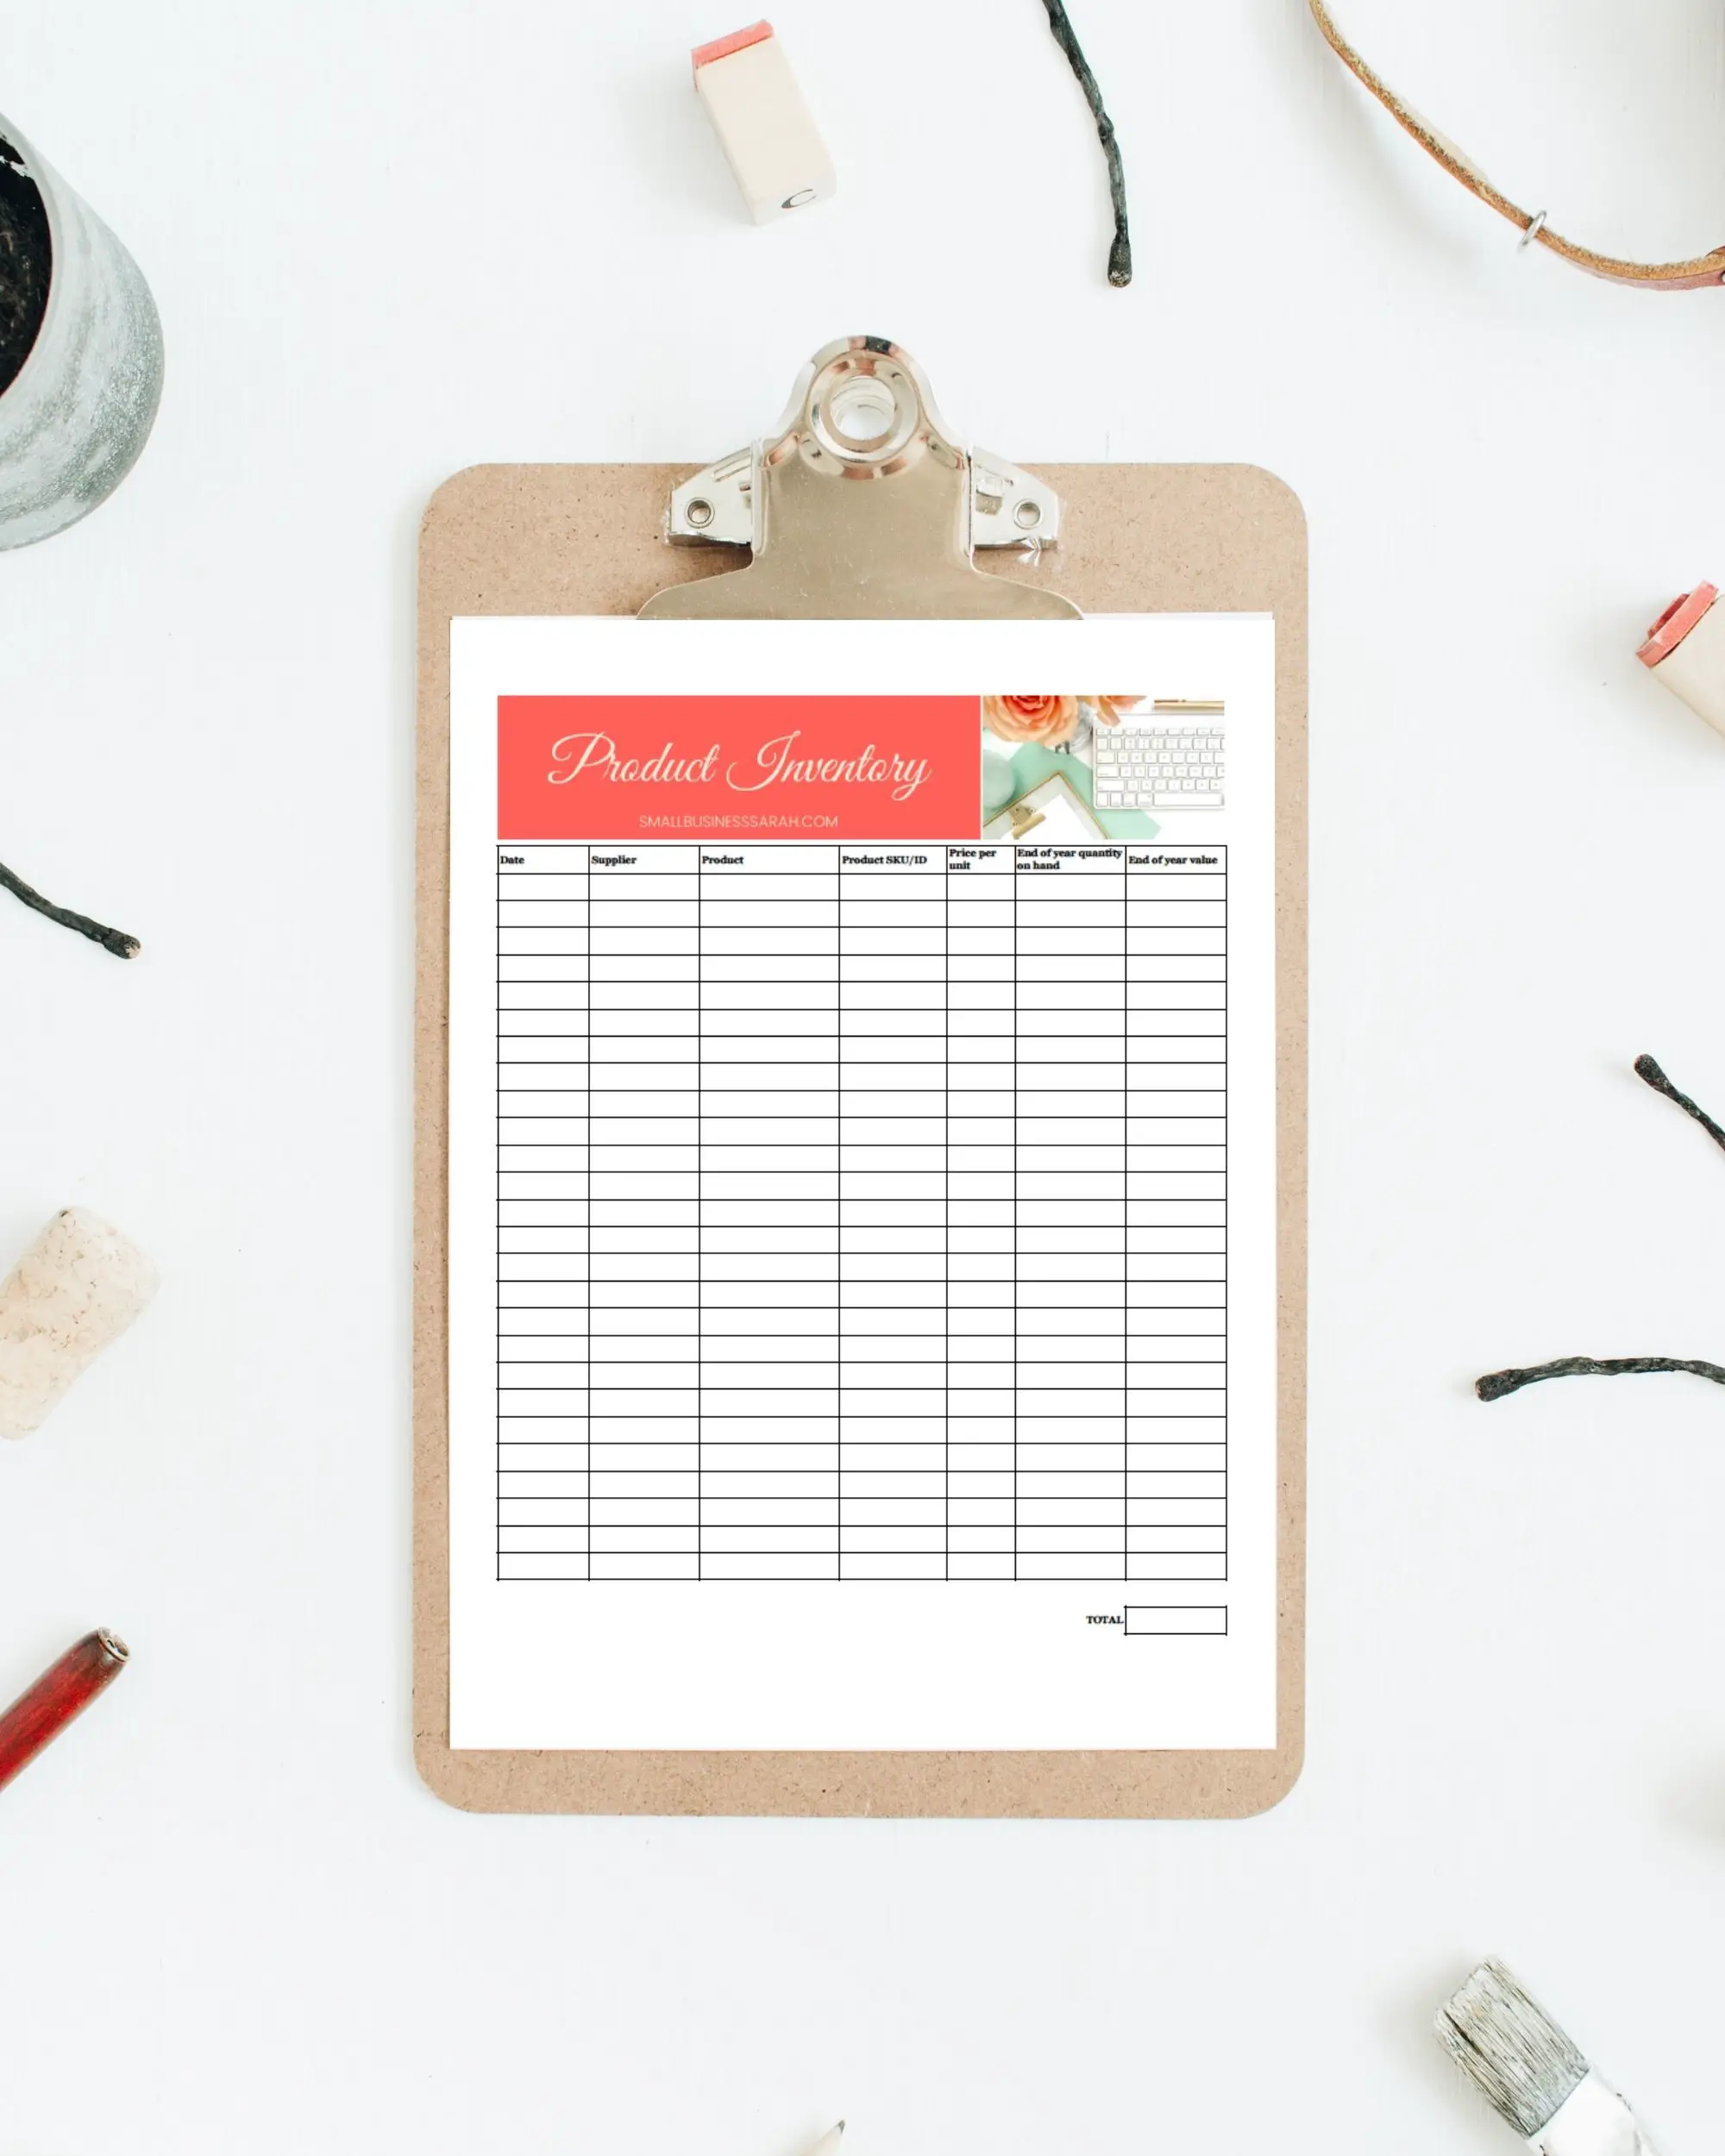 How To Keep Up With Your Etsy Product Inventory